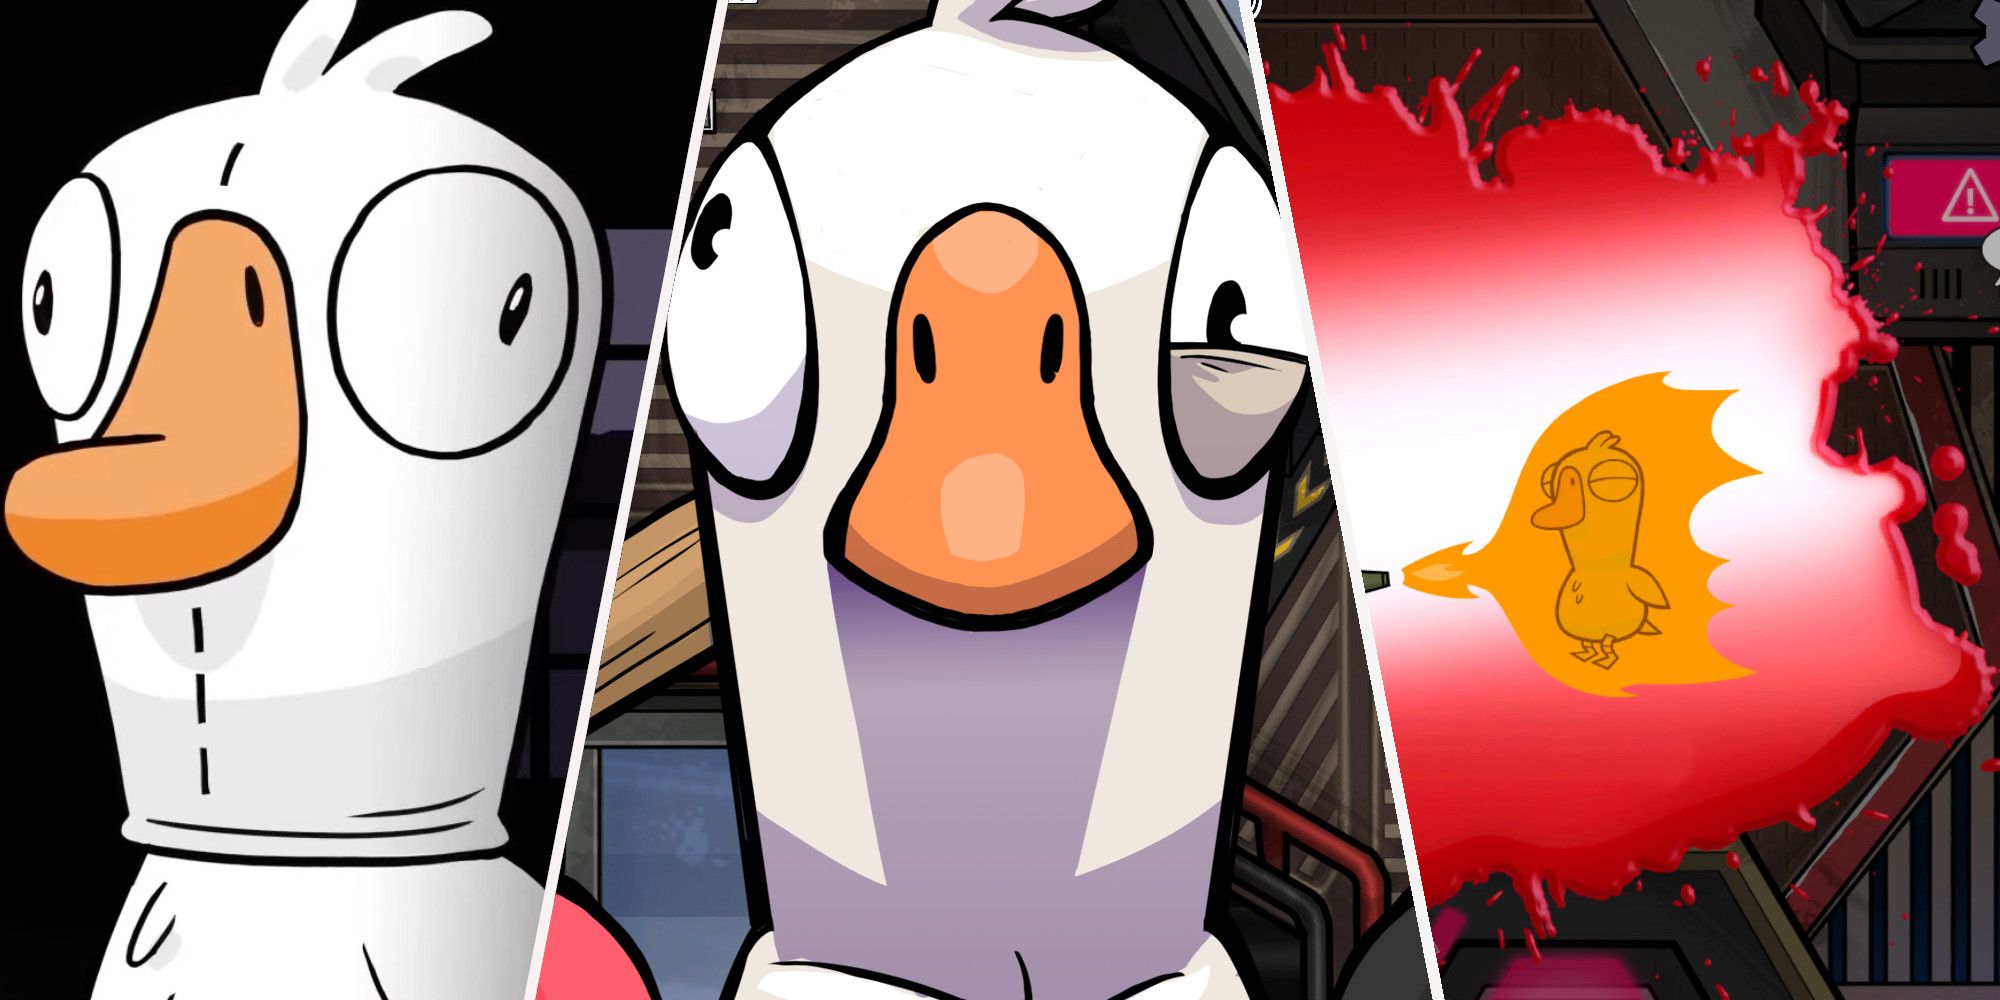 1 Duck in an goose suit looking at camera, 1 goose looking at the camera front facing, a goose getting burnt by the flamethrower